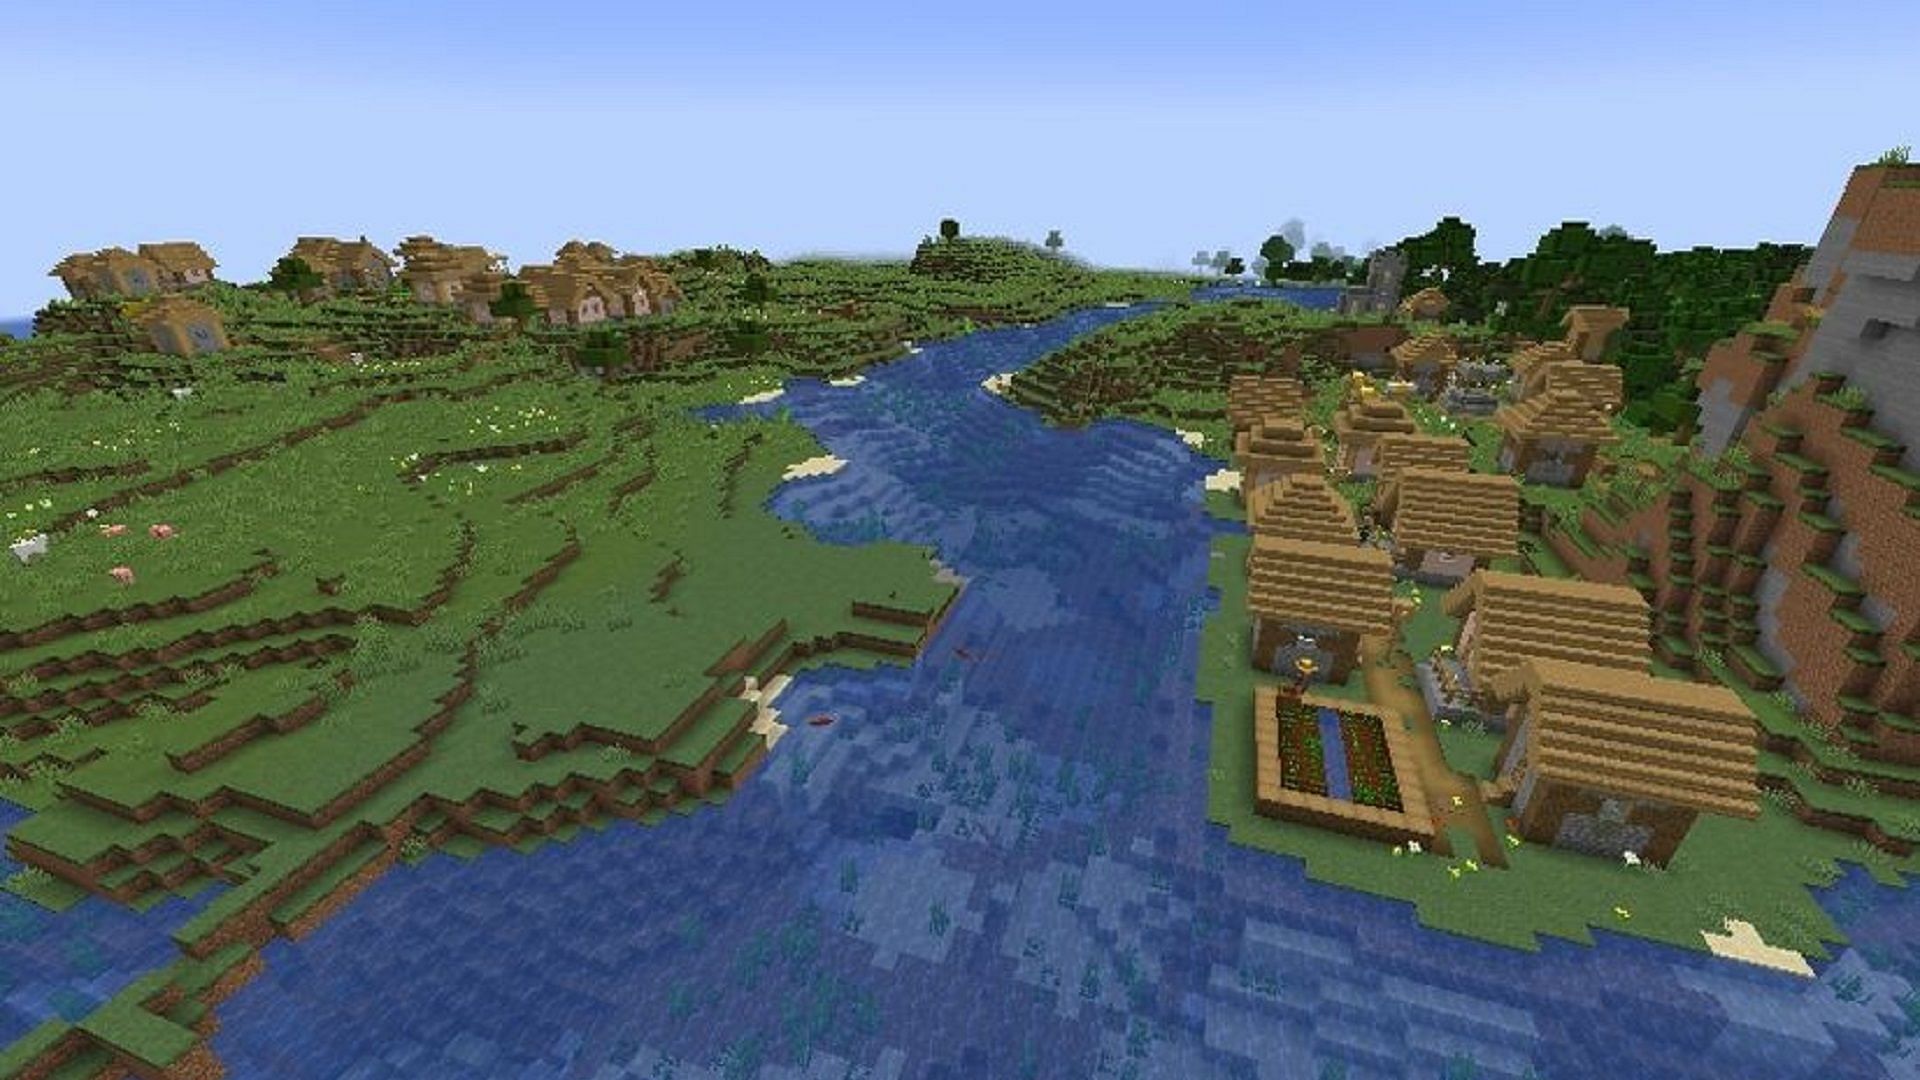 Two villages rest across each other peacefully along a river (Image via Mojang)